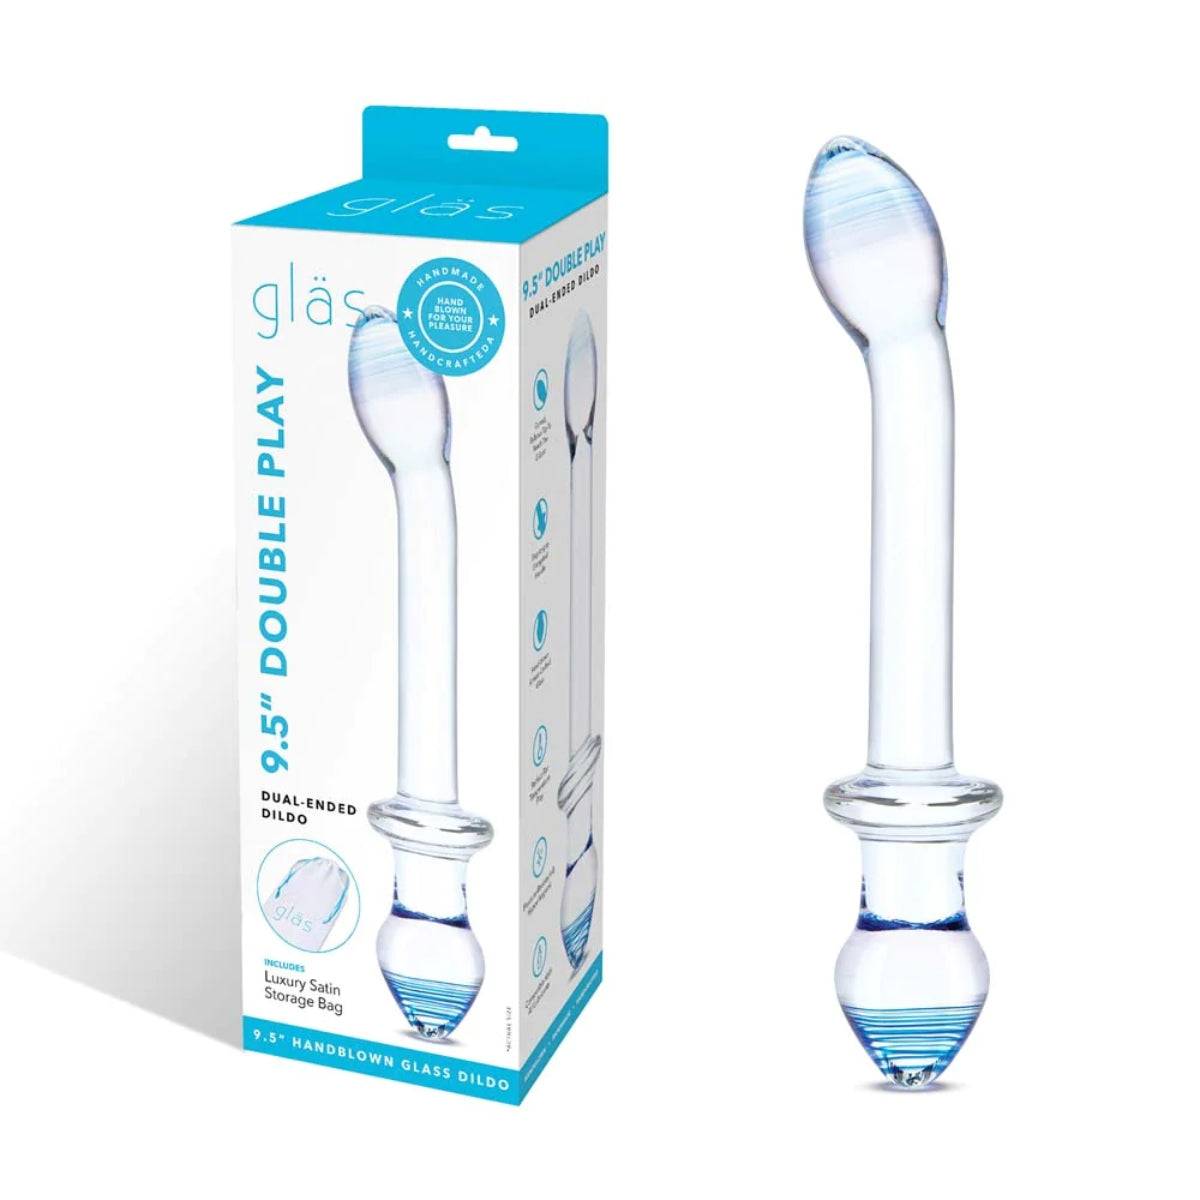 Glas Double Play Dual Ended Dildo Clear Blue 9.5 Inch - Simply Pleasure